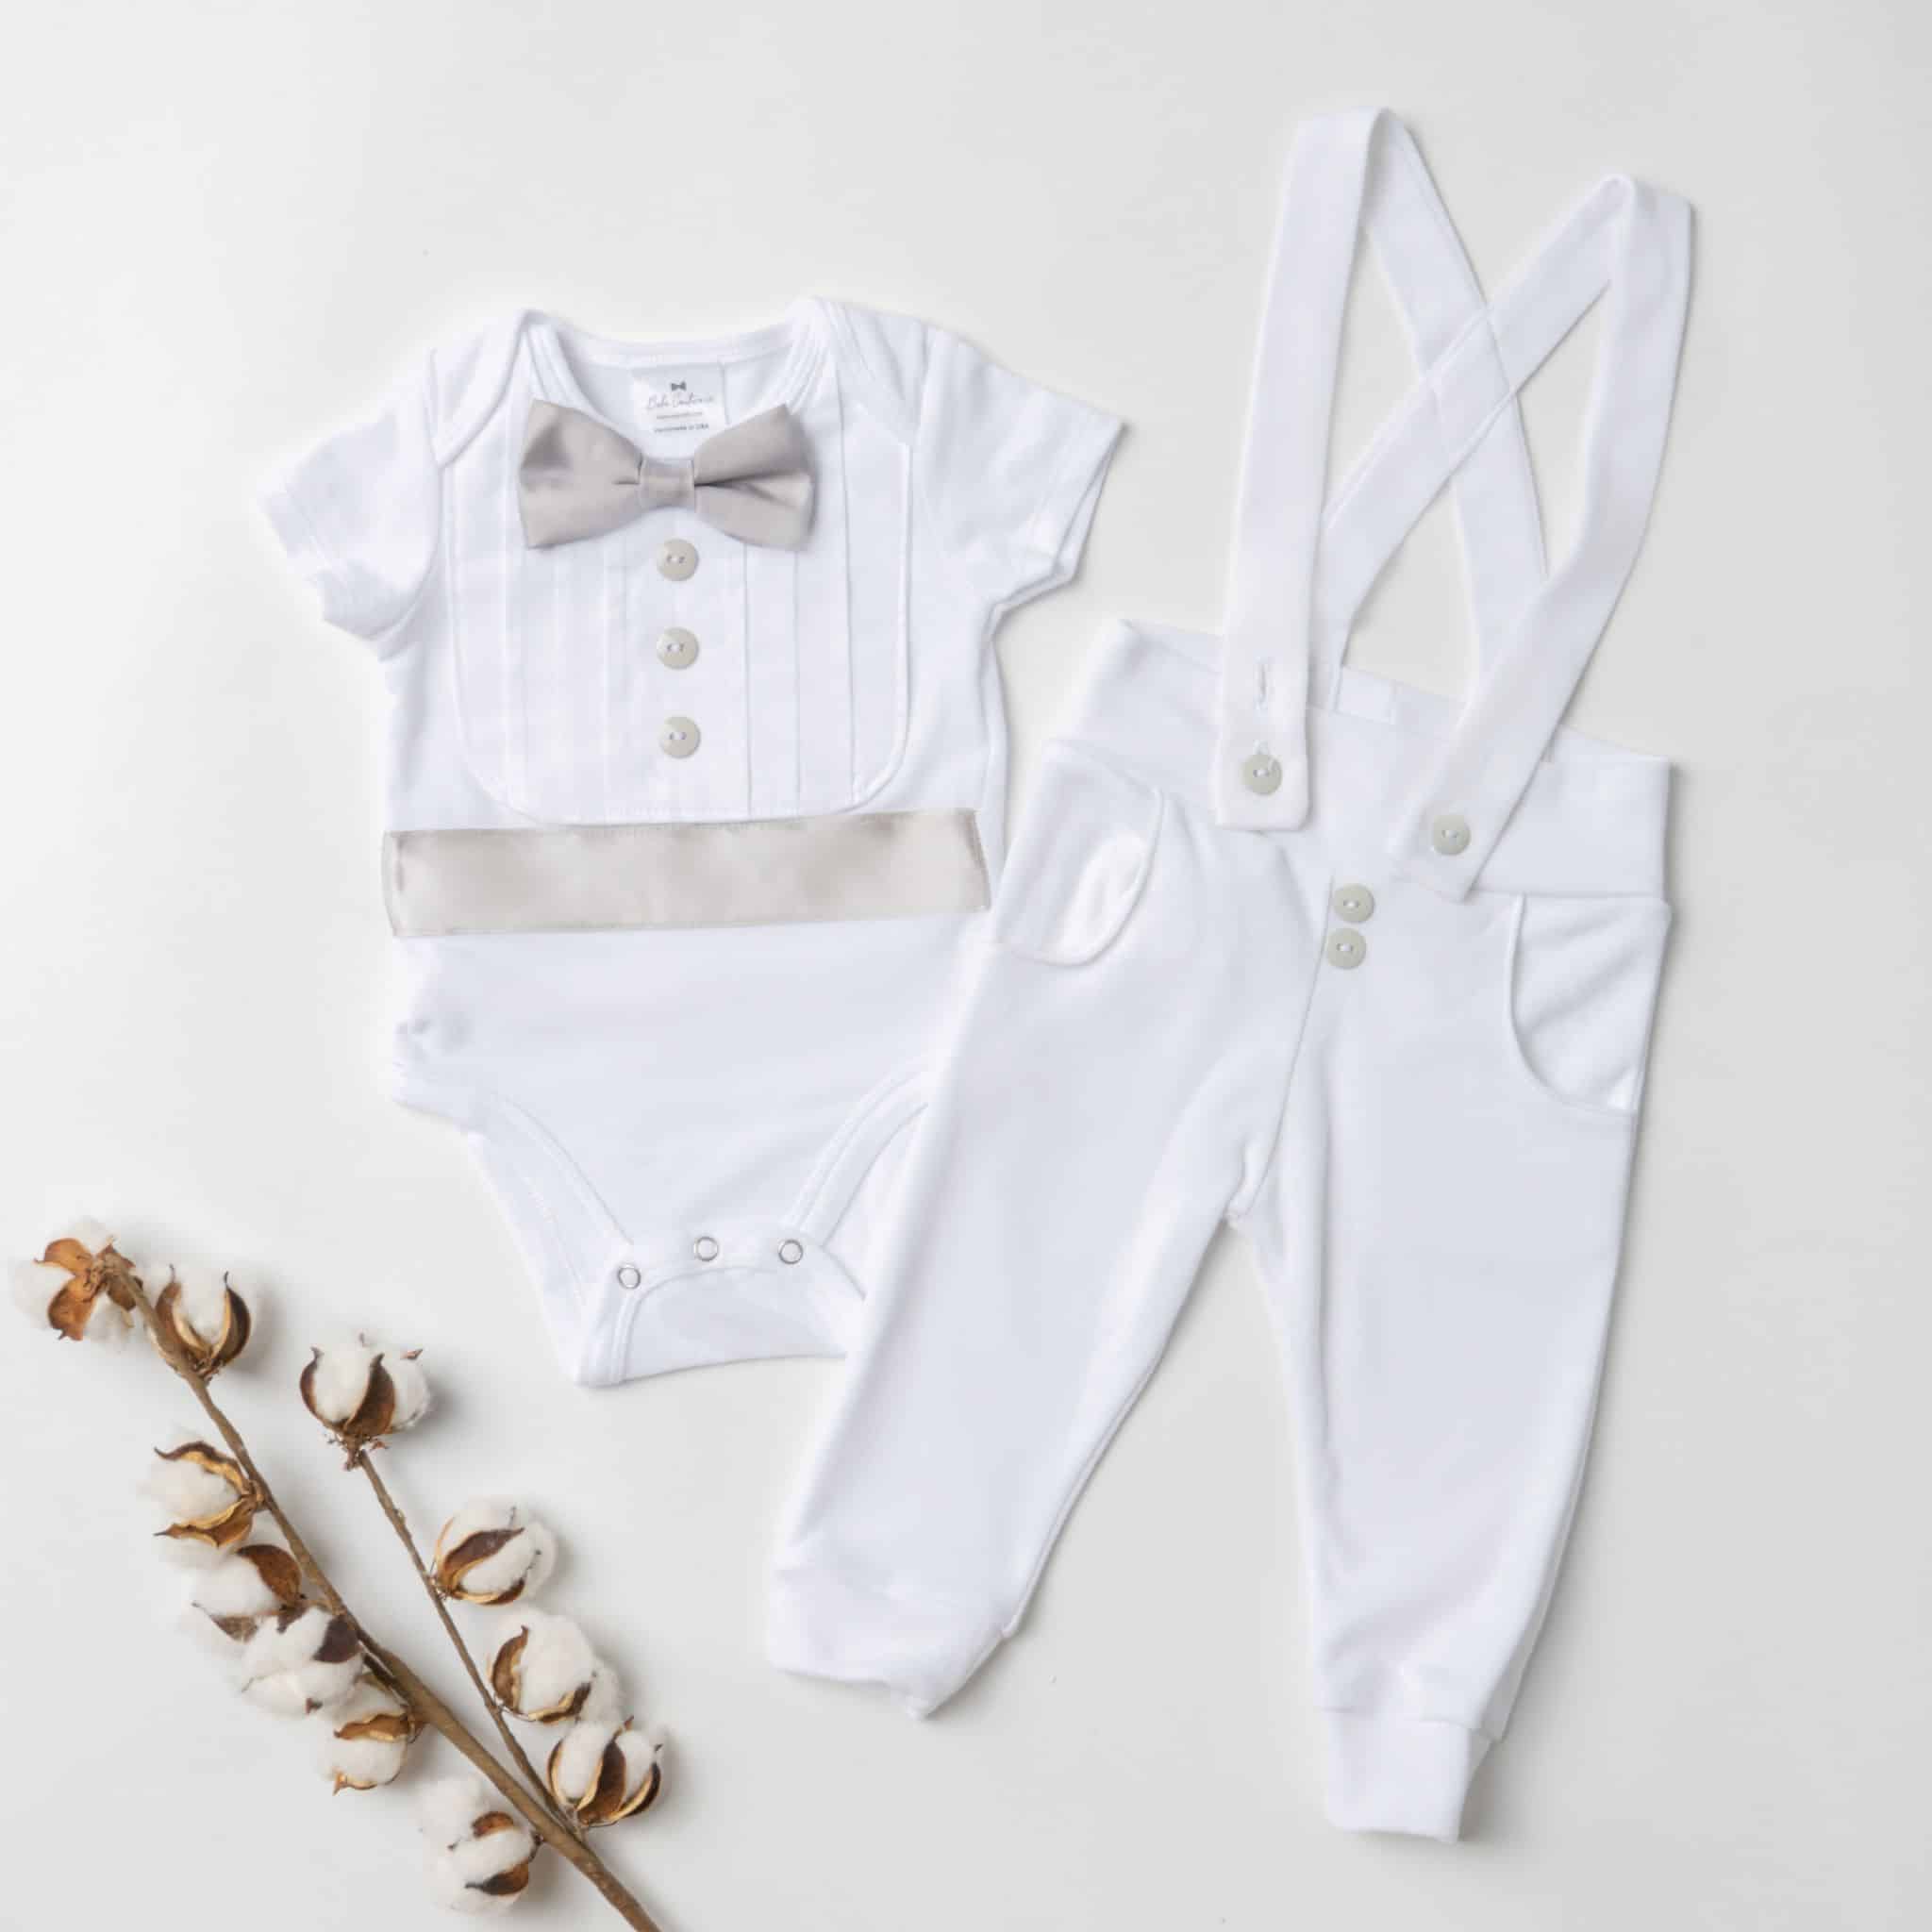 Baby Boys Bodysuit Shirt & BOW Tie Outfit Special Occasion Christening Christmas 